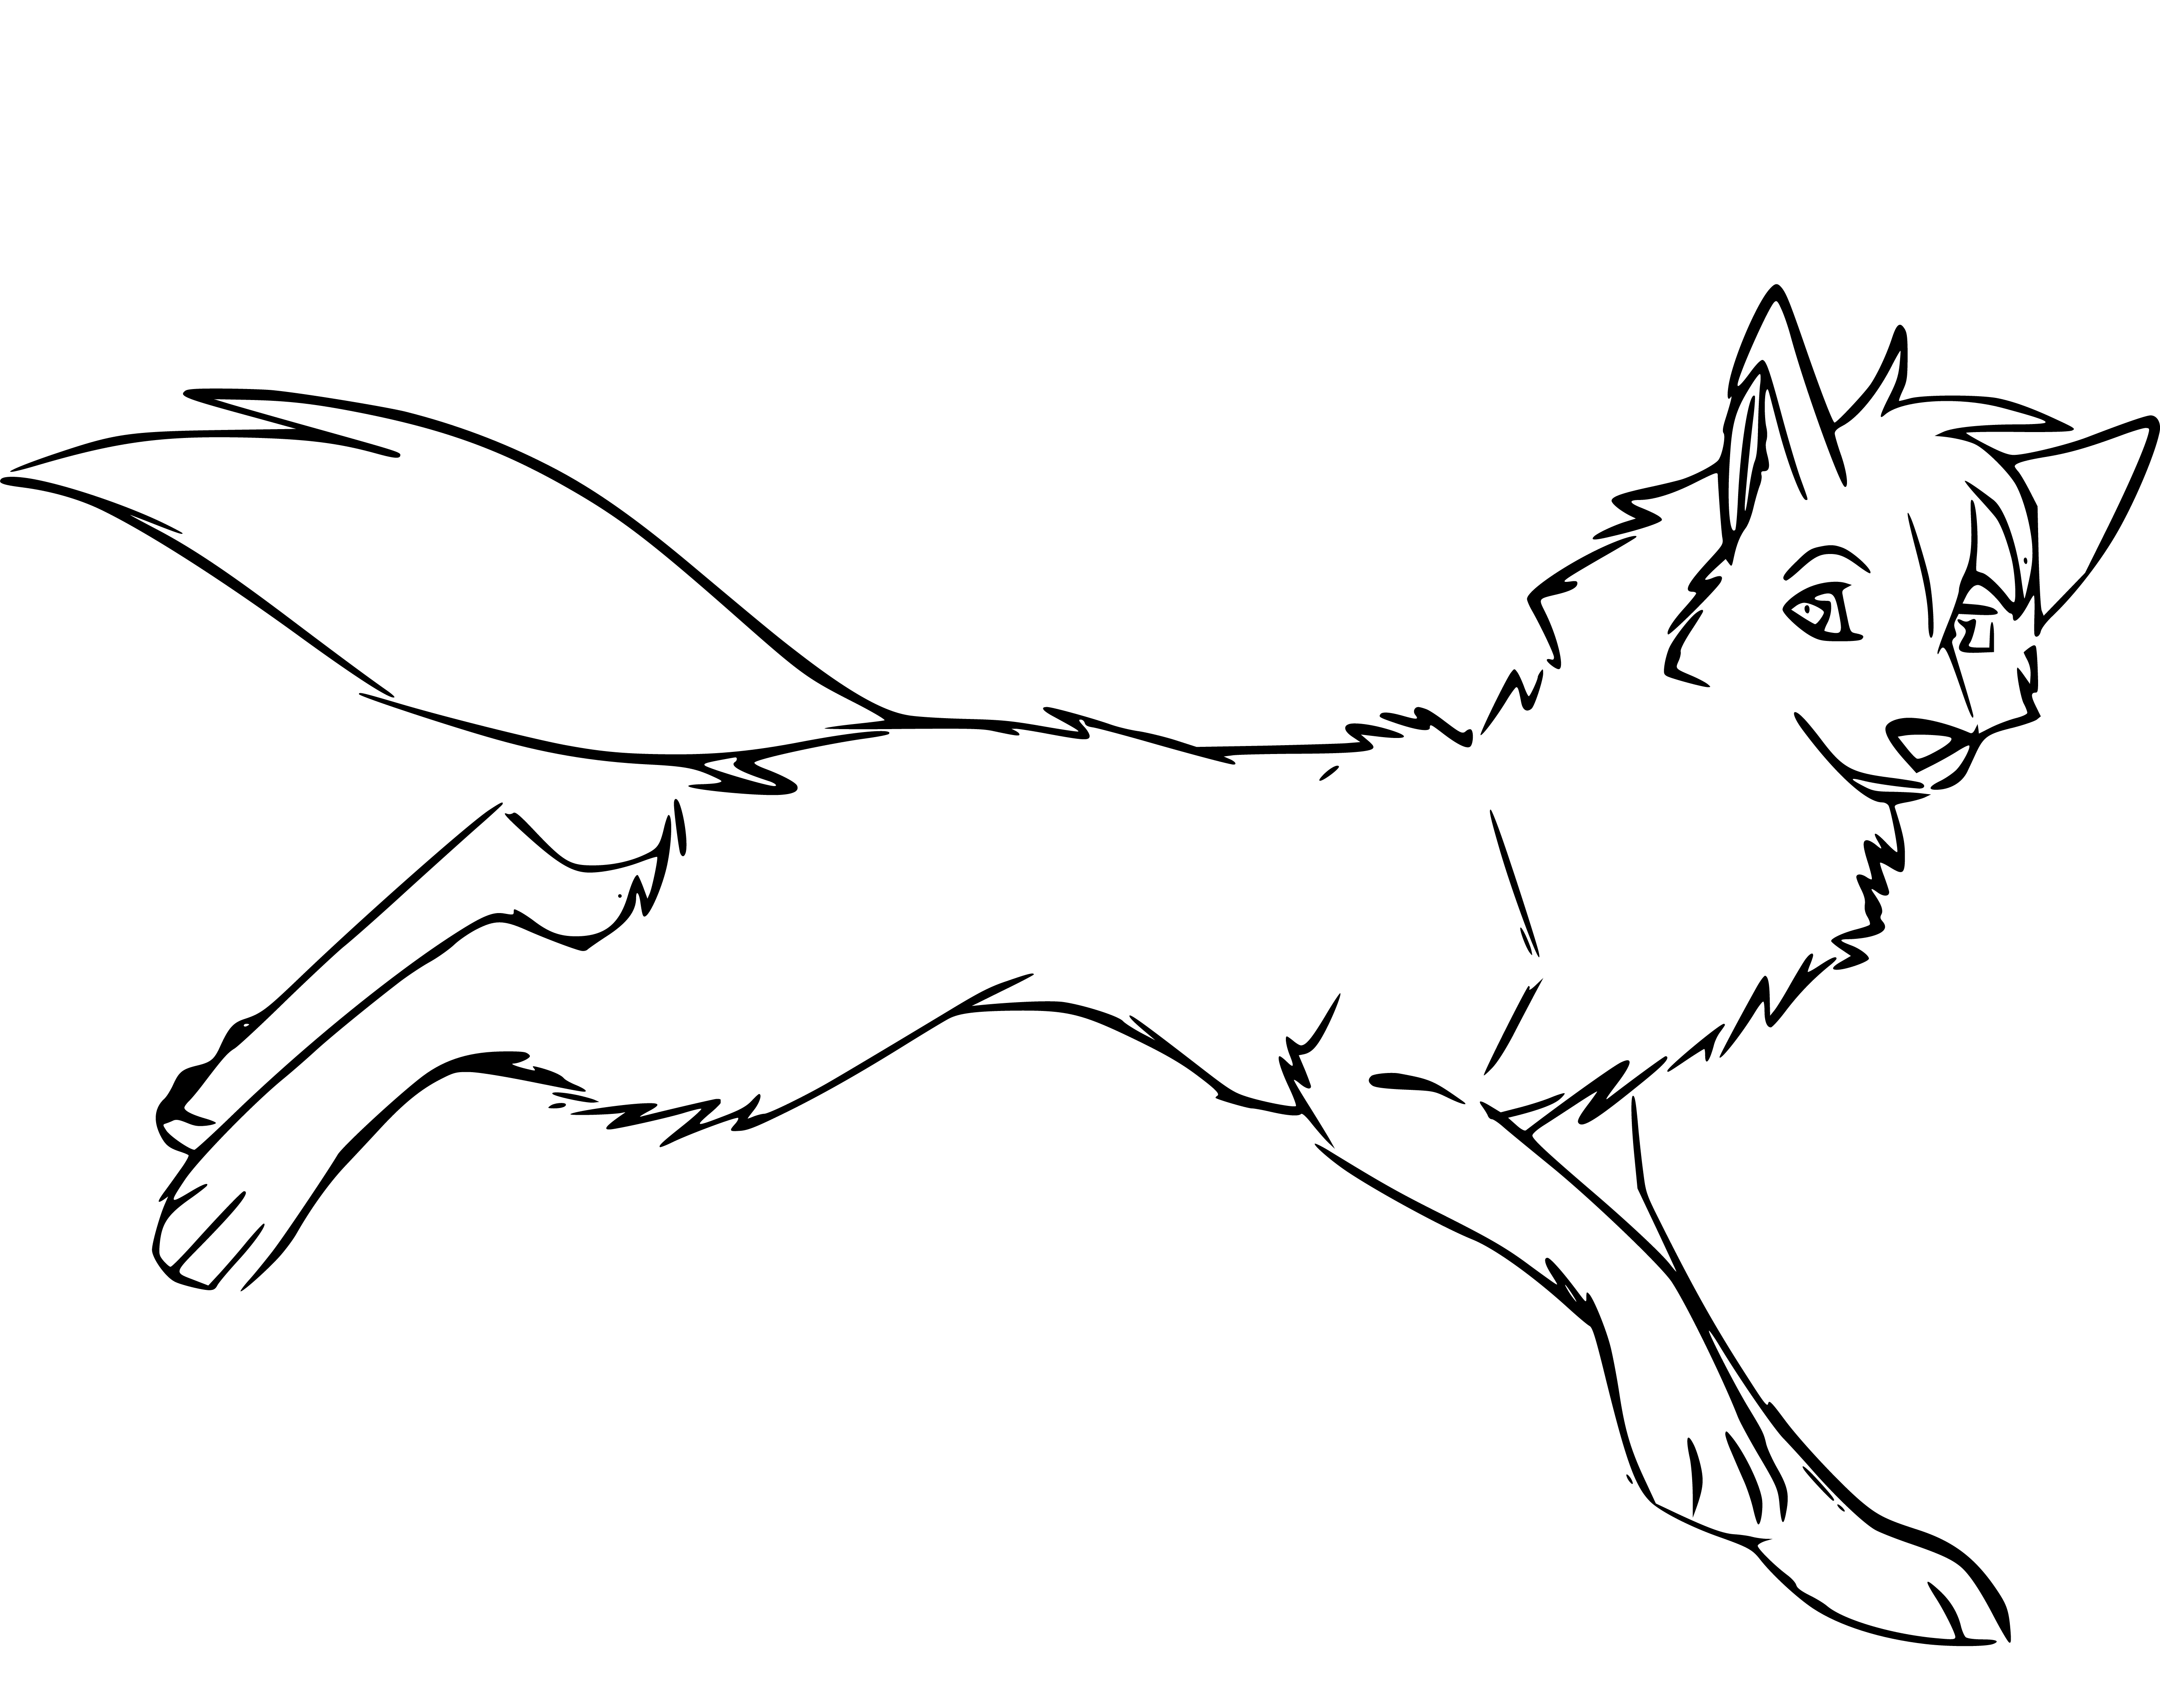 Printable Wolf running Coloring Page for kids.